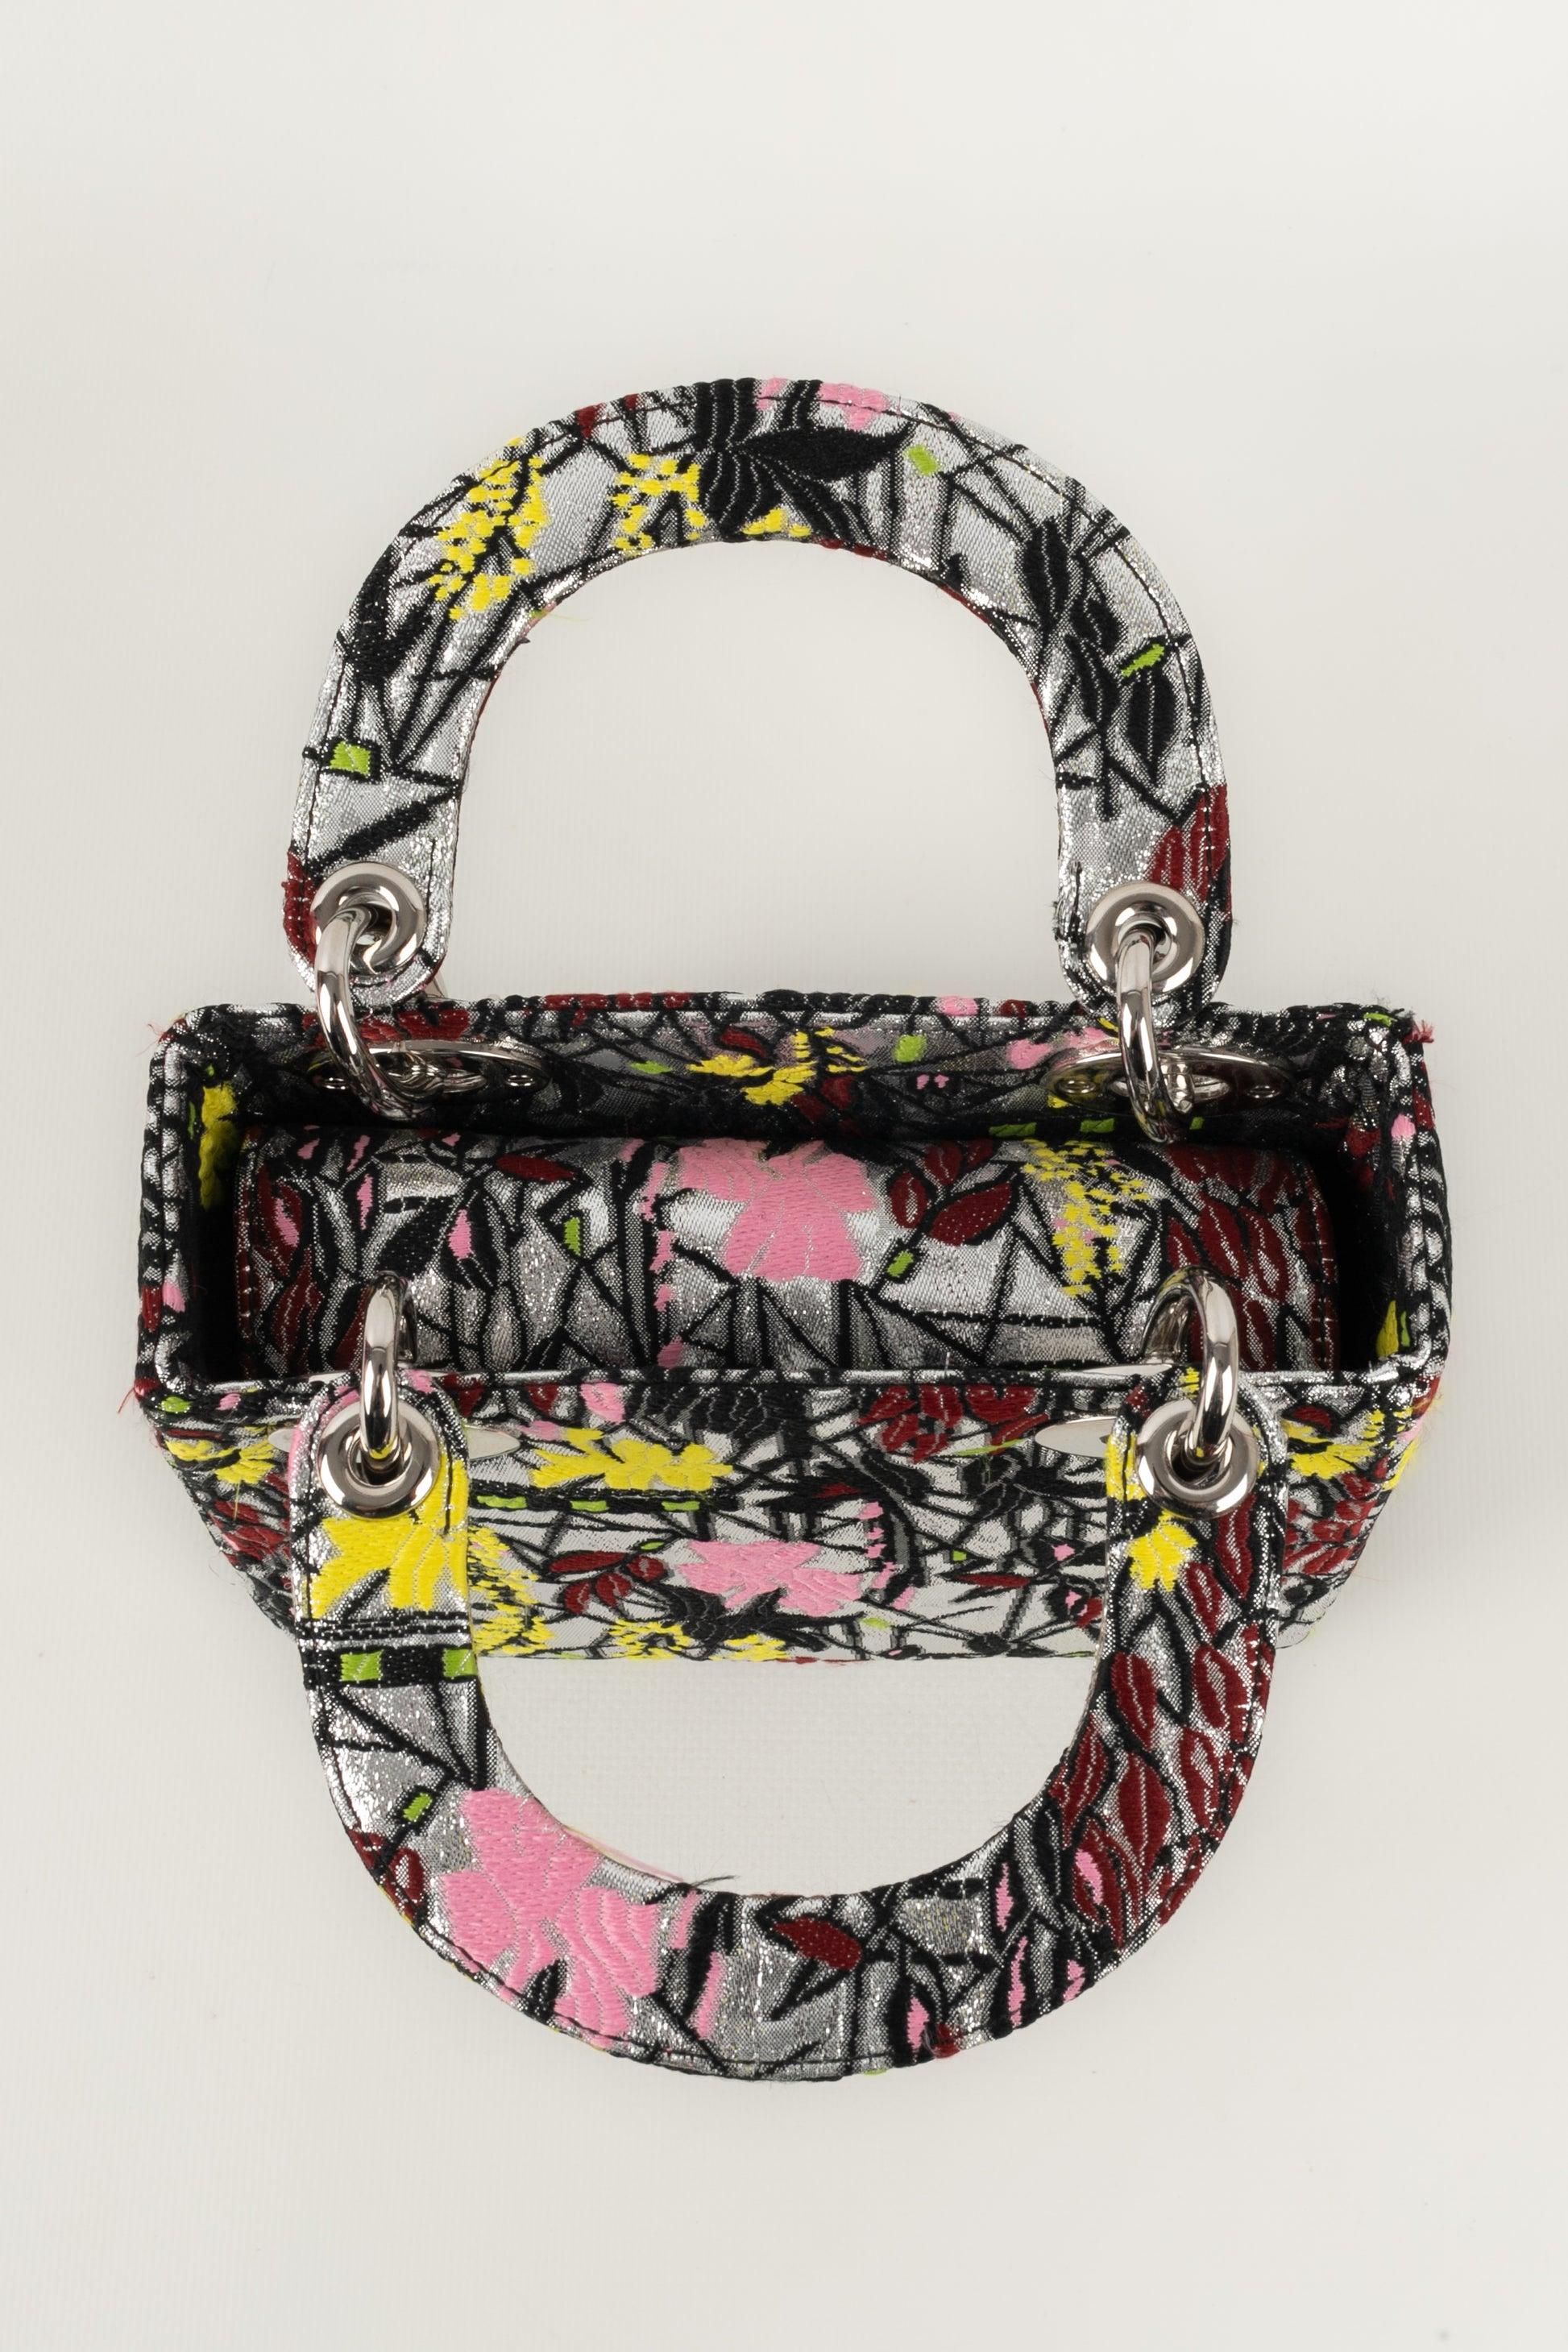 Lady Dior Bag Entirely Embroidered with Lurex and Multicolored Yarns, 2014 For Sale 1